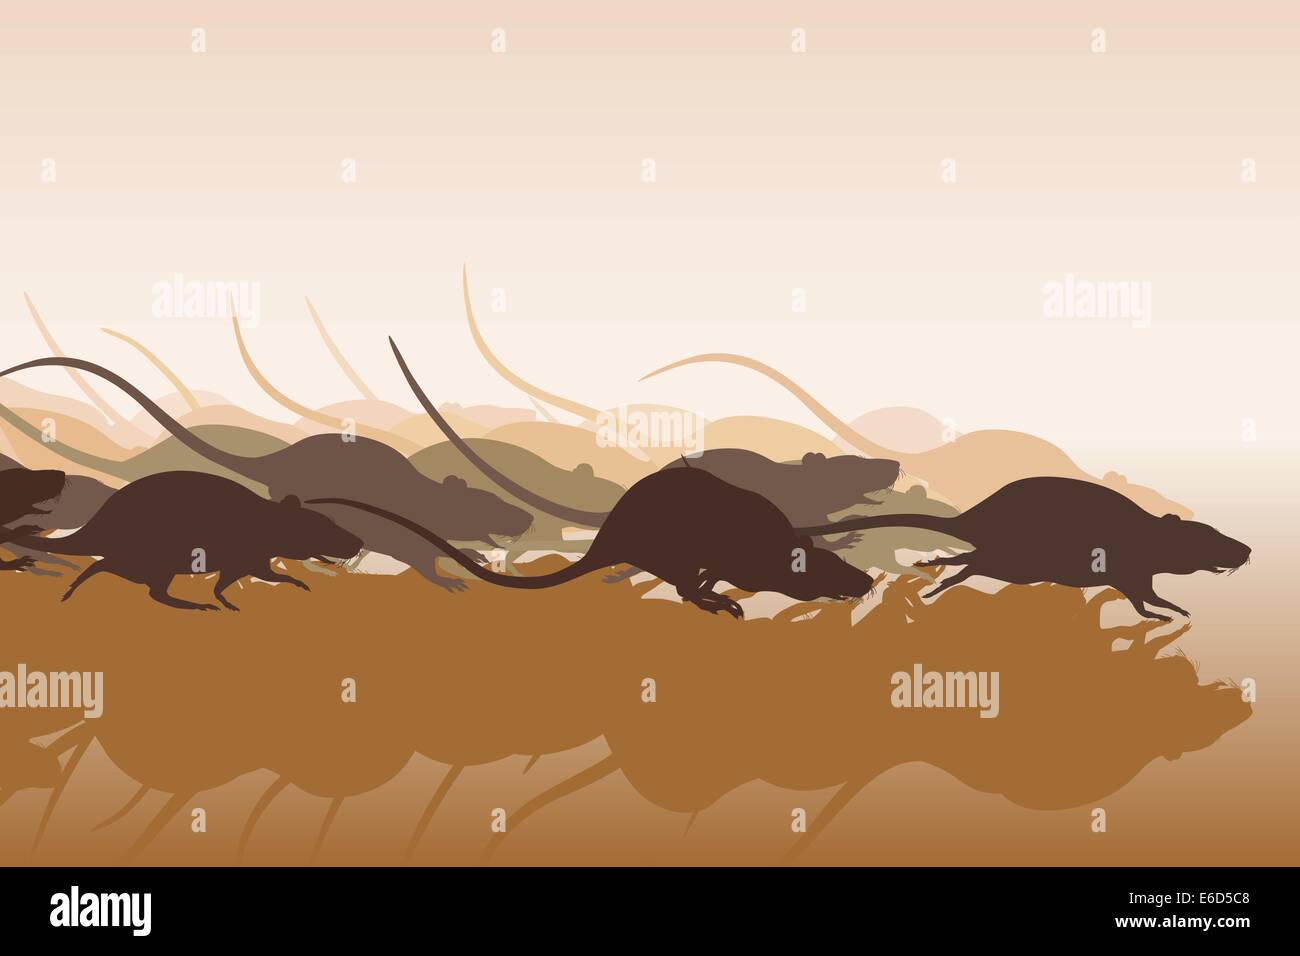 Editable vector illustration of many rats racing or running away Stock Vector